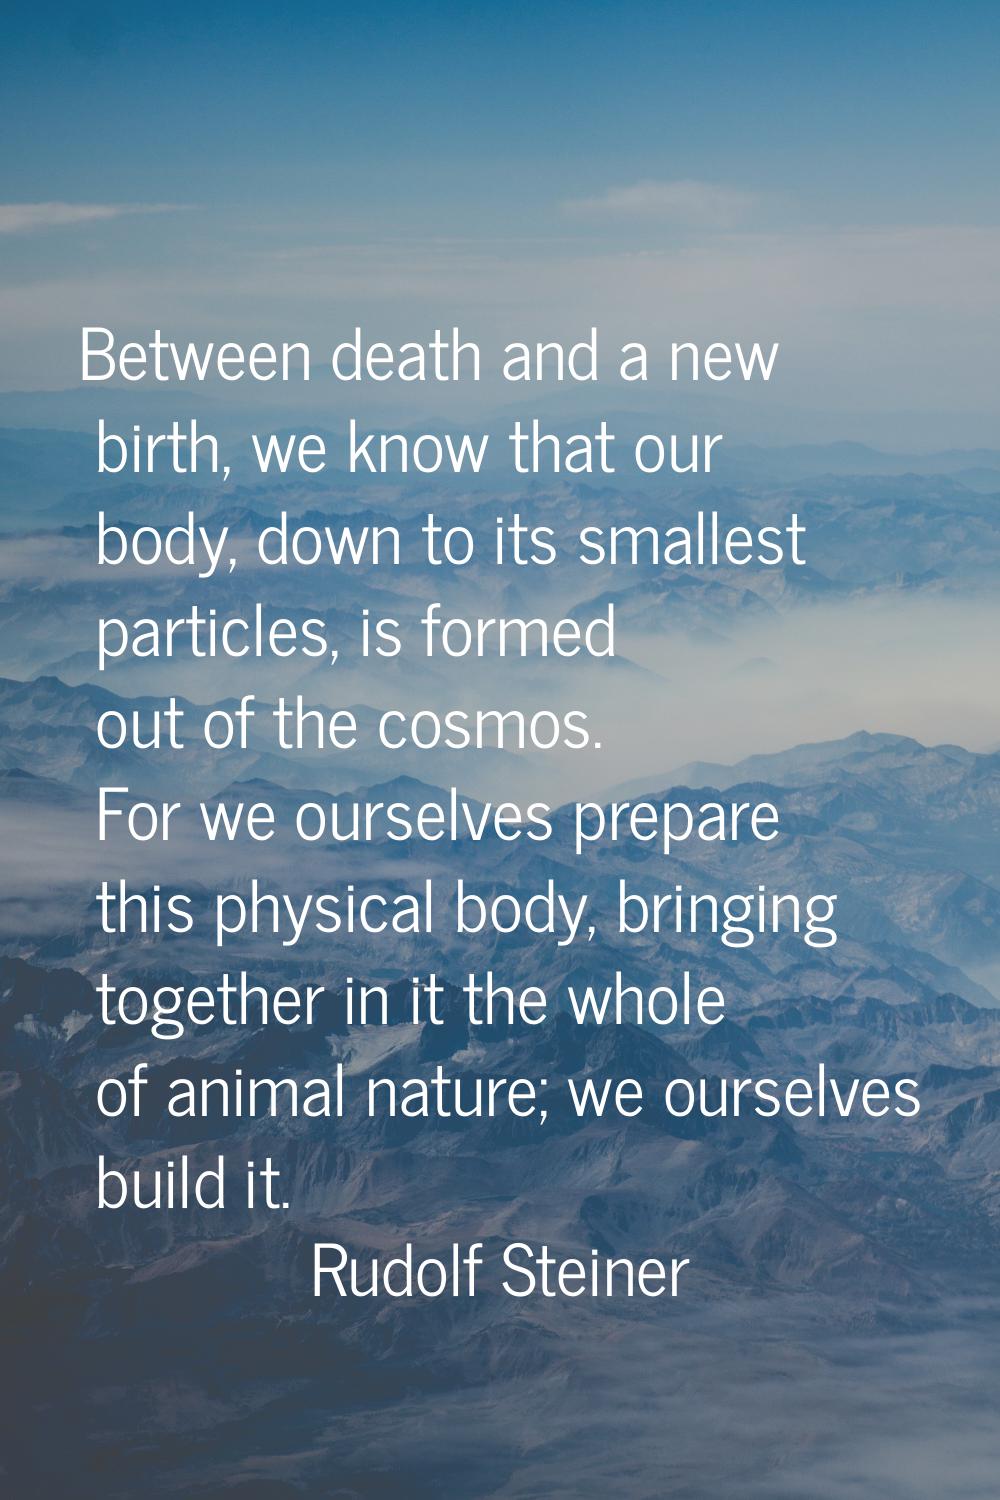 Between death and a new birth, we know that our body, down to its smallest particles, is formed out